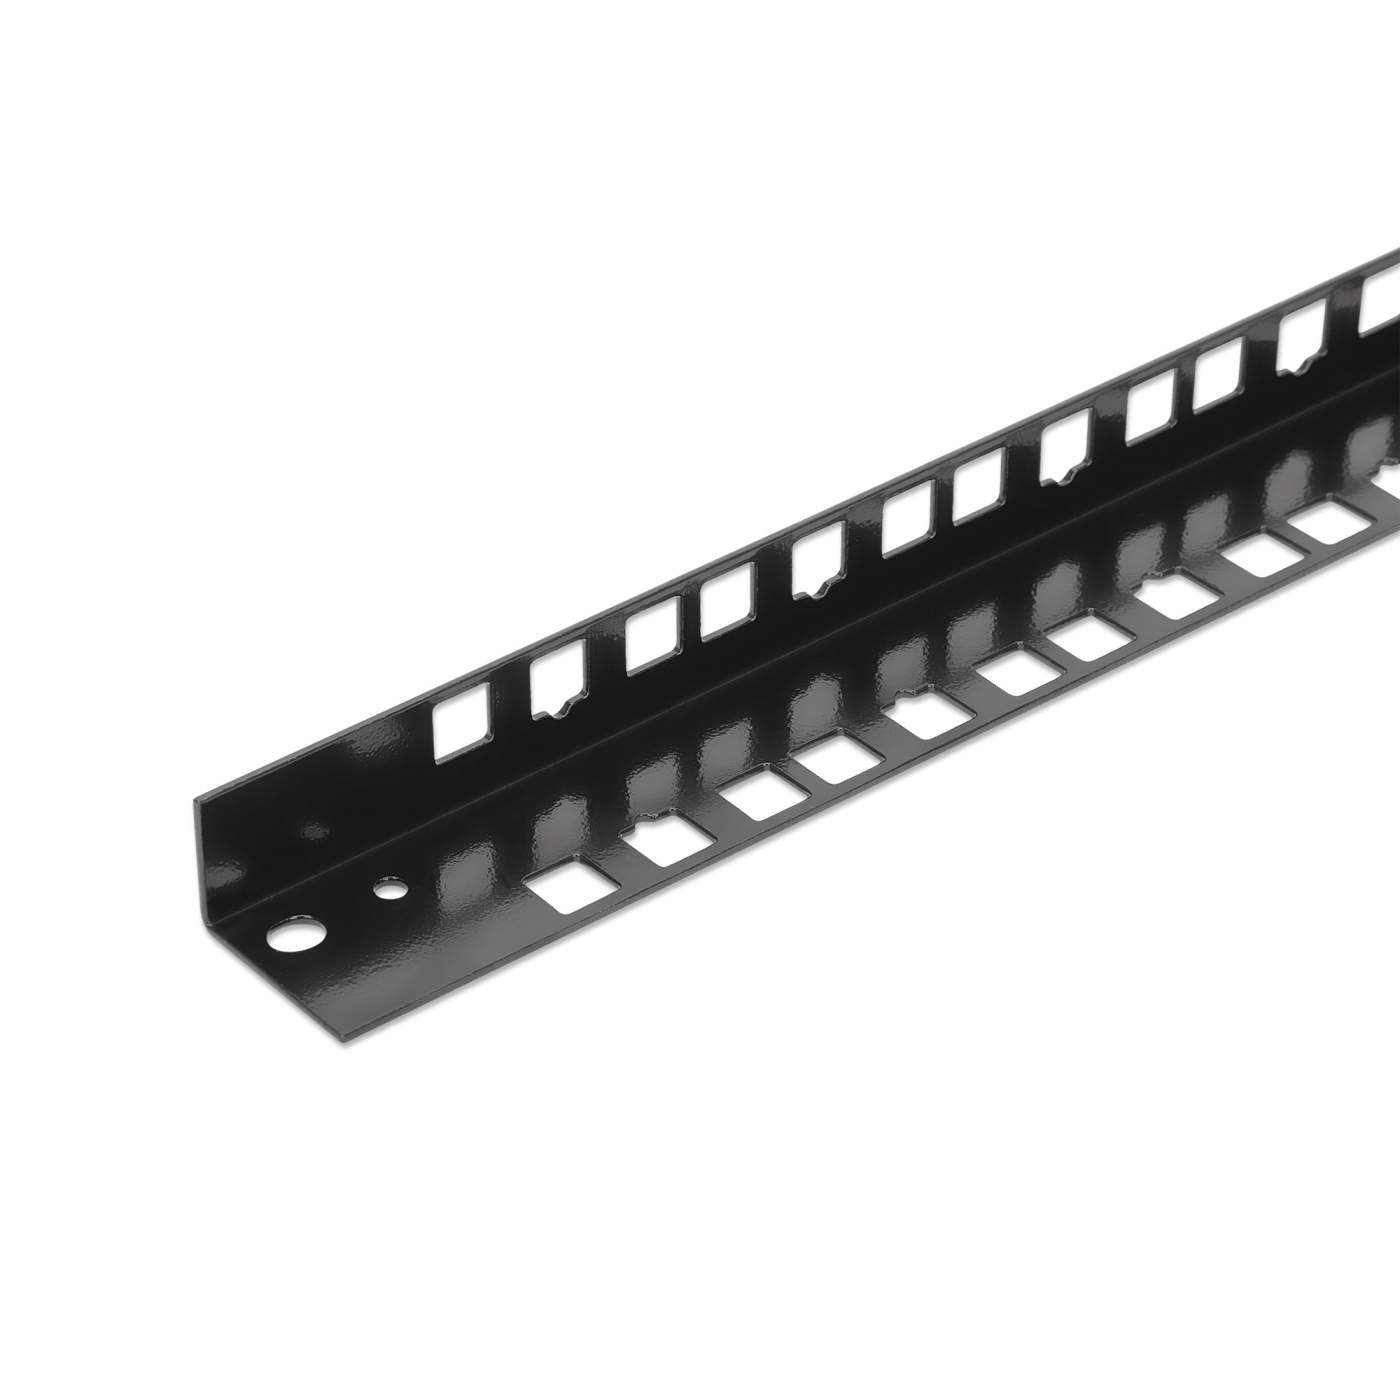 Spare Rails for 19" Wallmount Cabinets, 12U Image 4